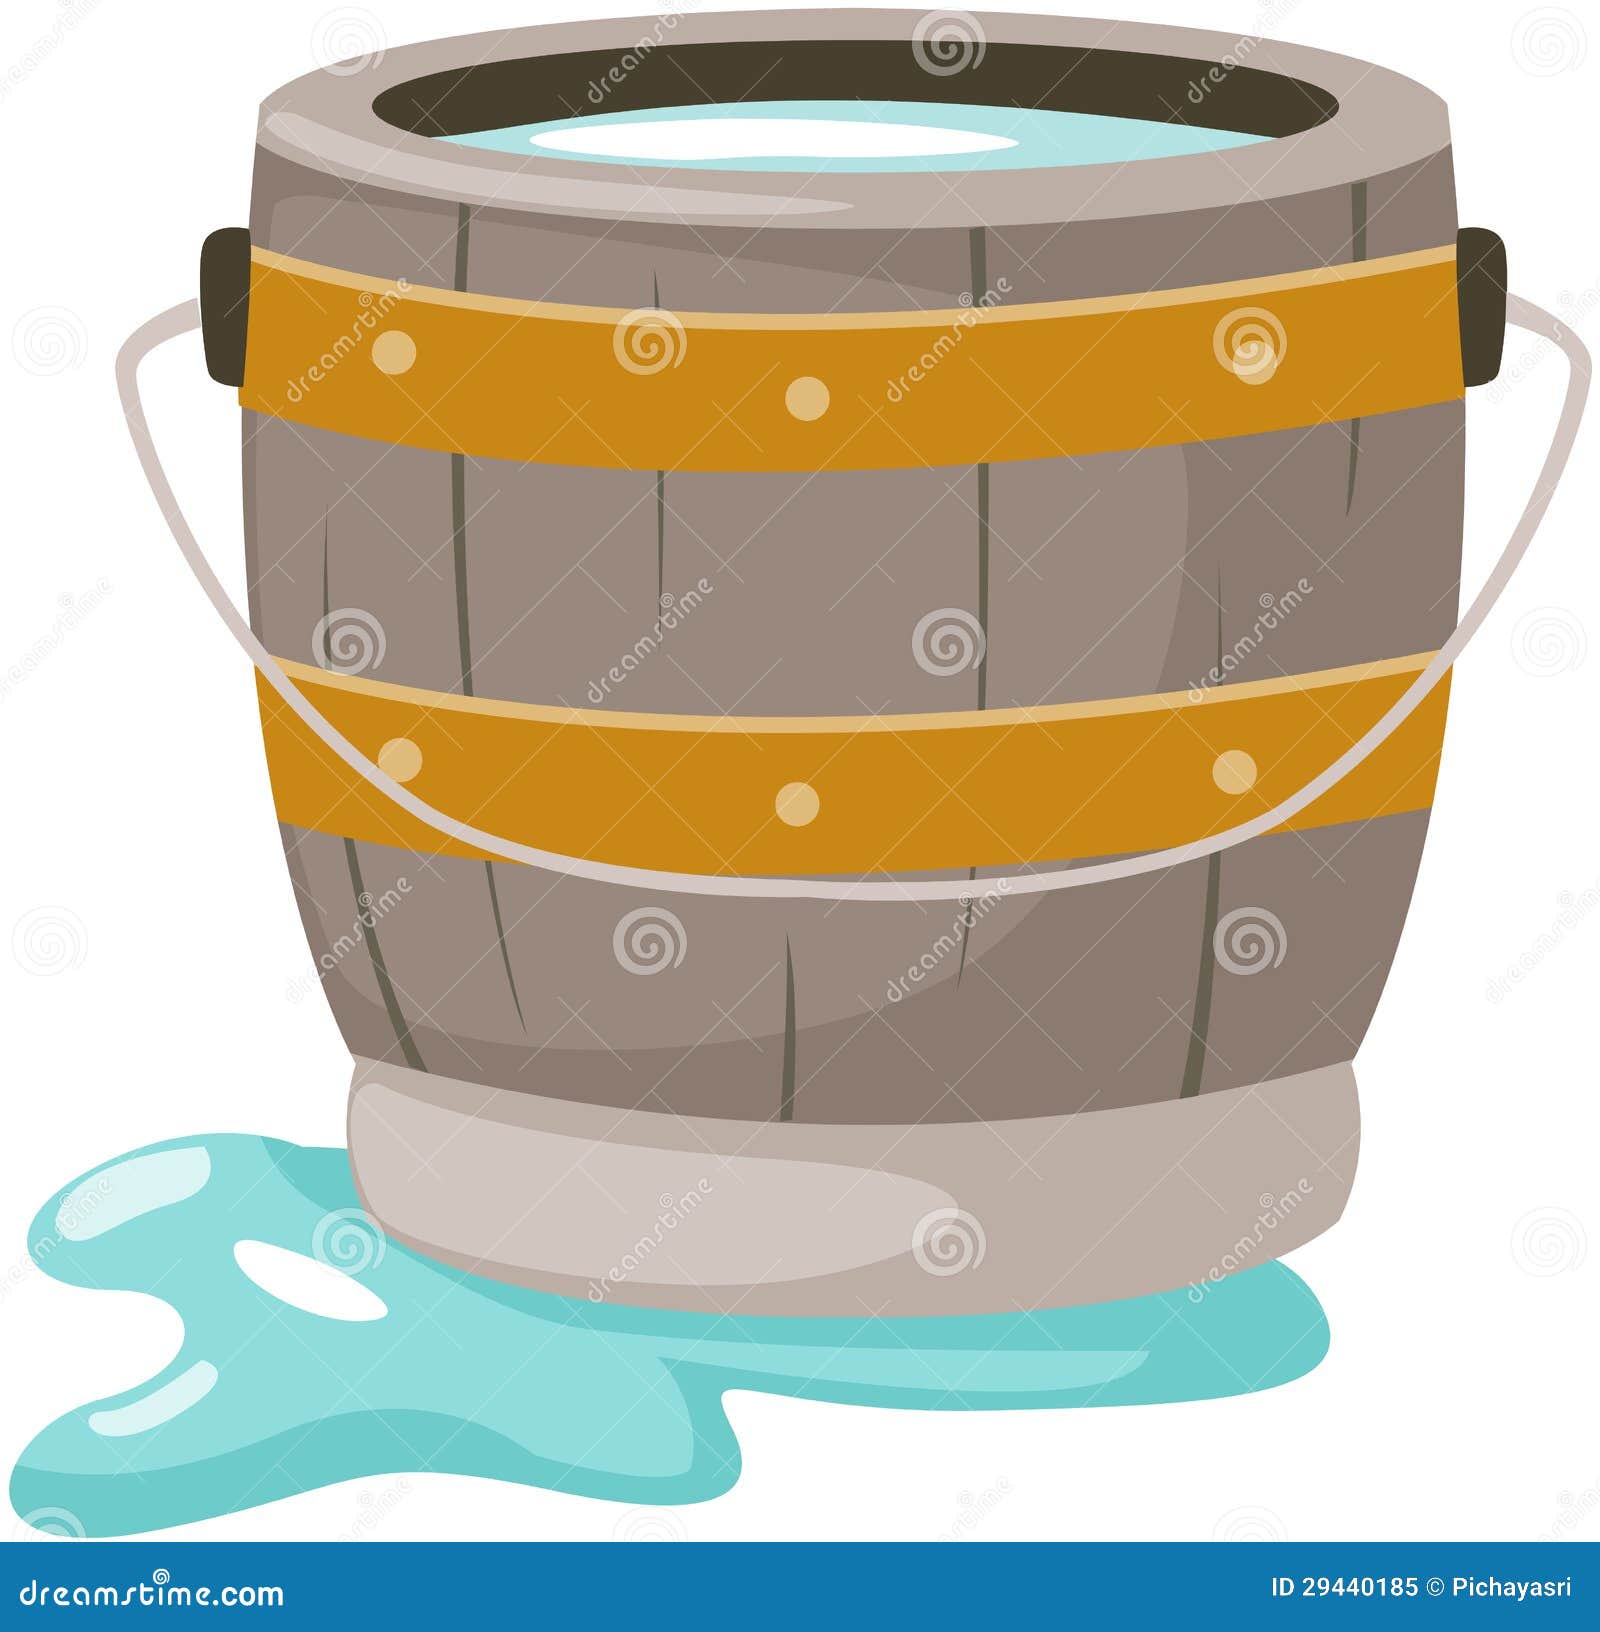 Bucket Of Water Royalty Free Stock Photo  Image: 29440185